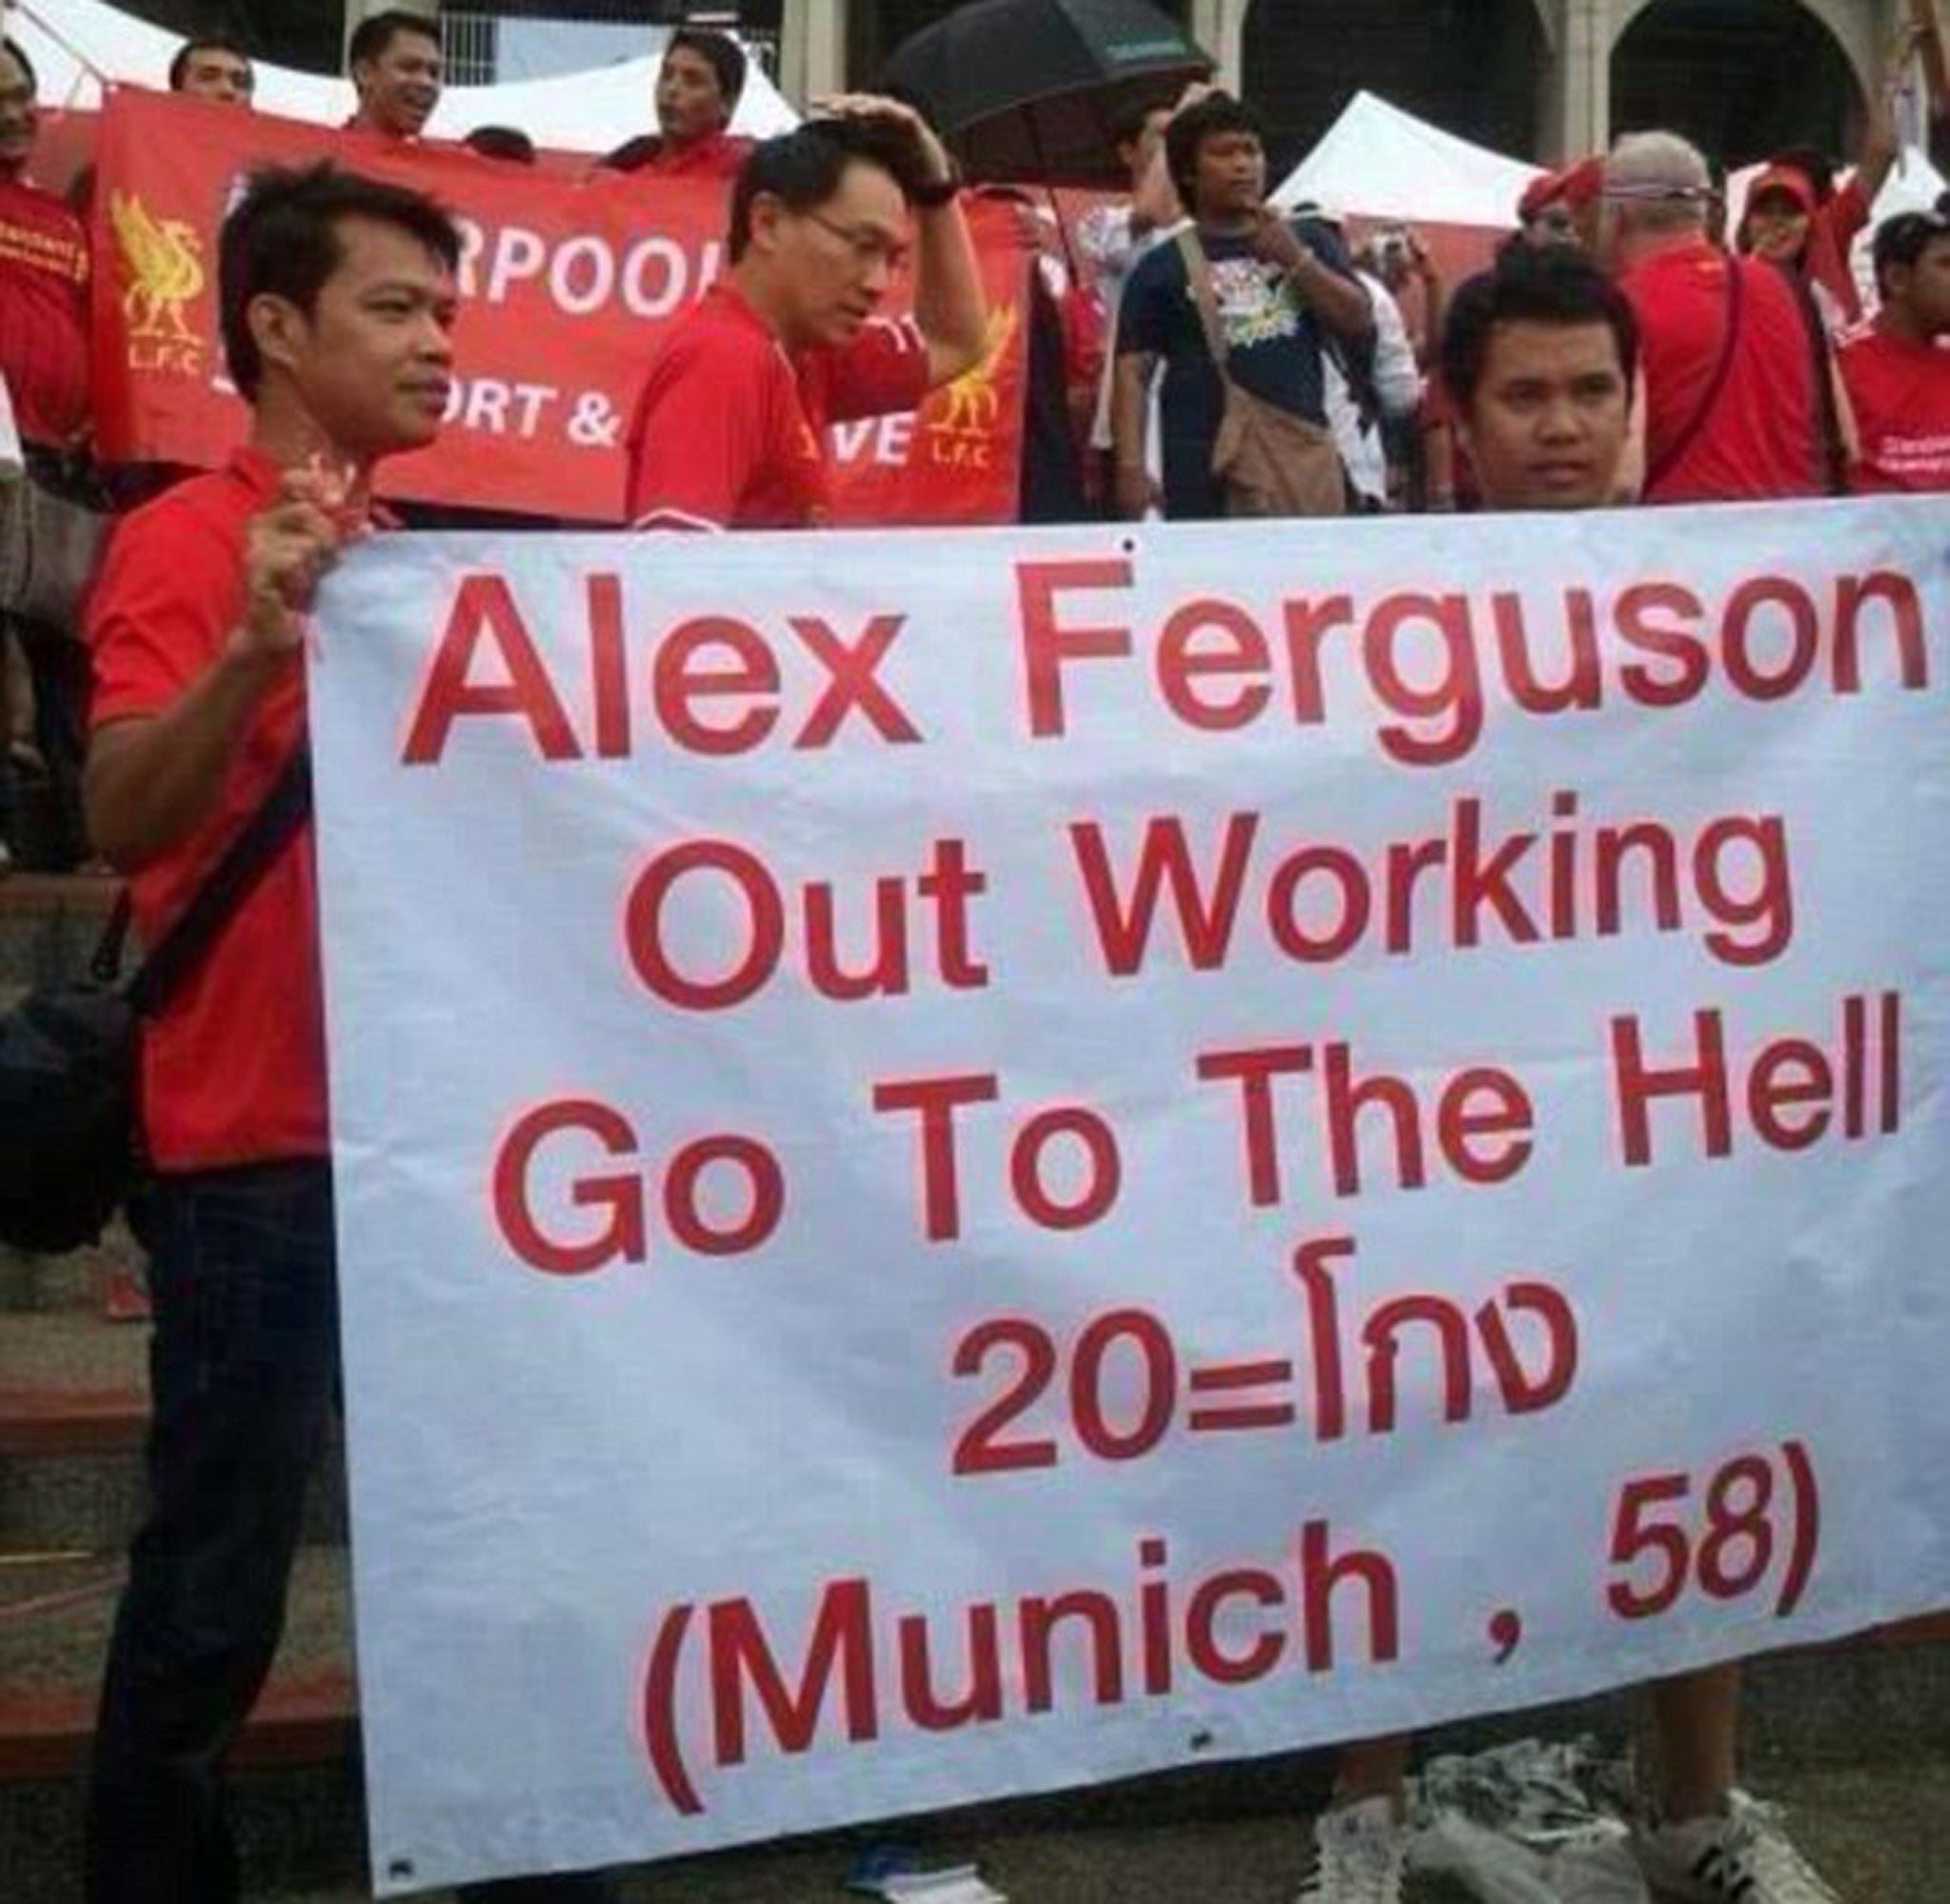 Liverpool supporters in Thailand unveiled a sickening banner mocking the Munich Air Disaster